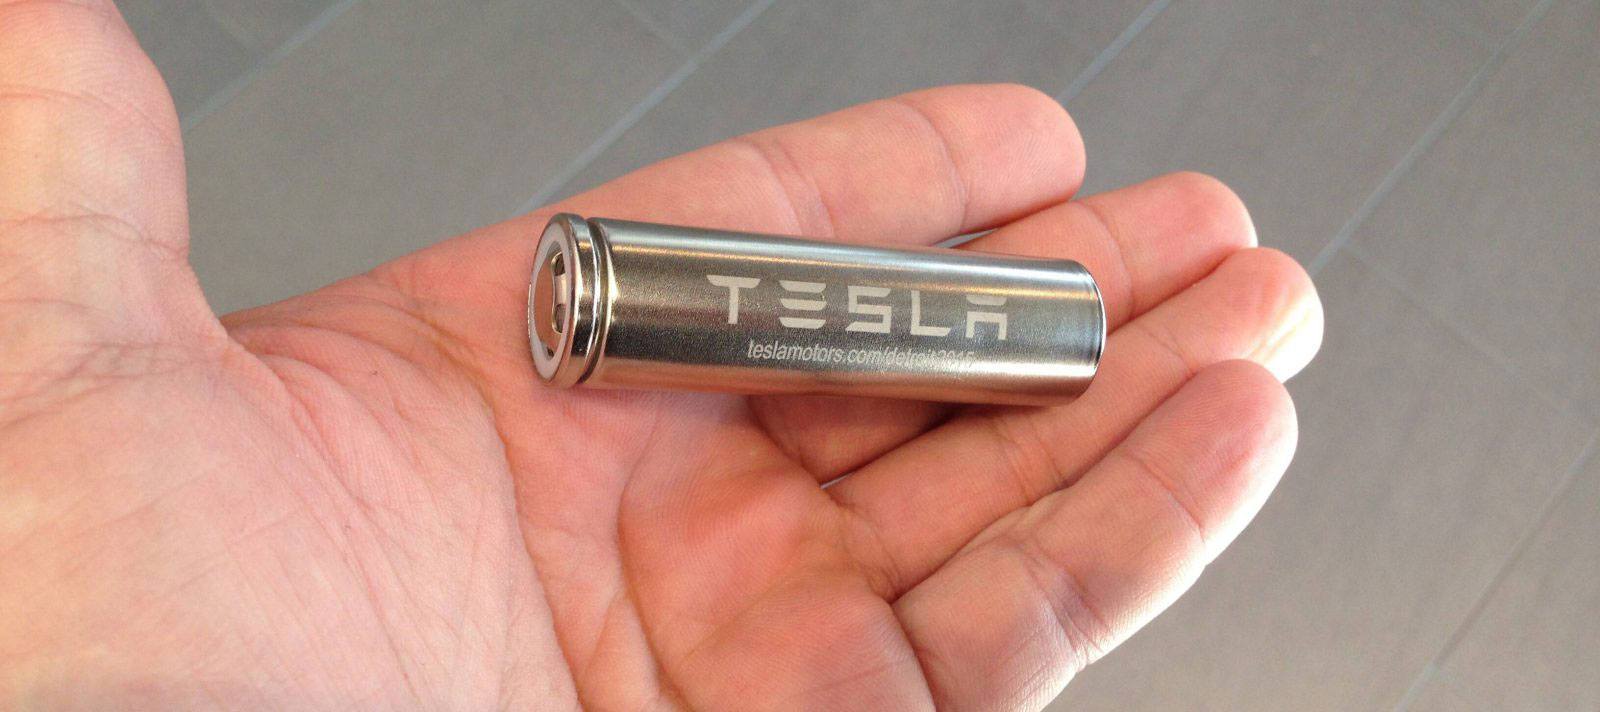 Tesla Just Doubled the Batteries' Lifetime Four Years Ahead of Schedule